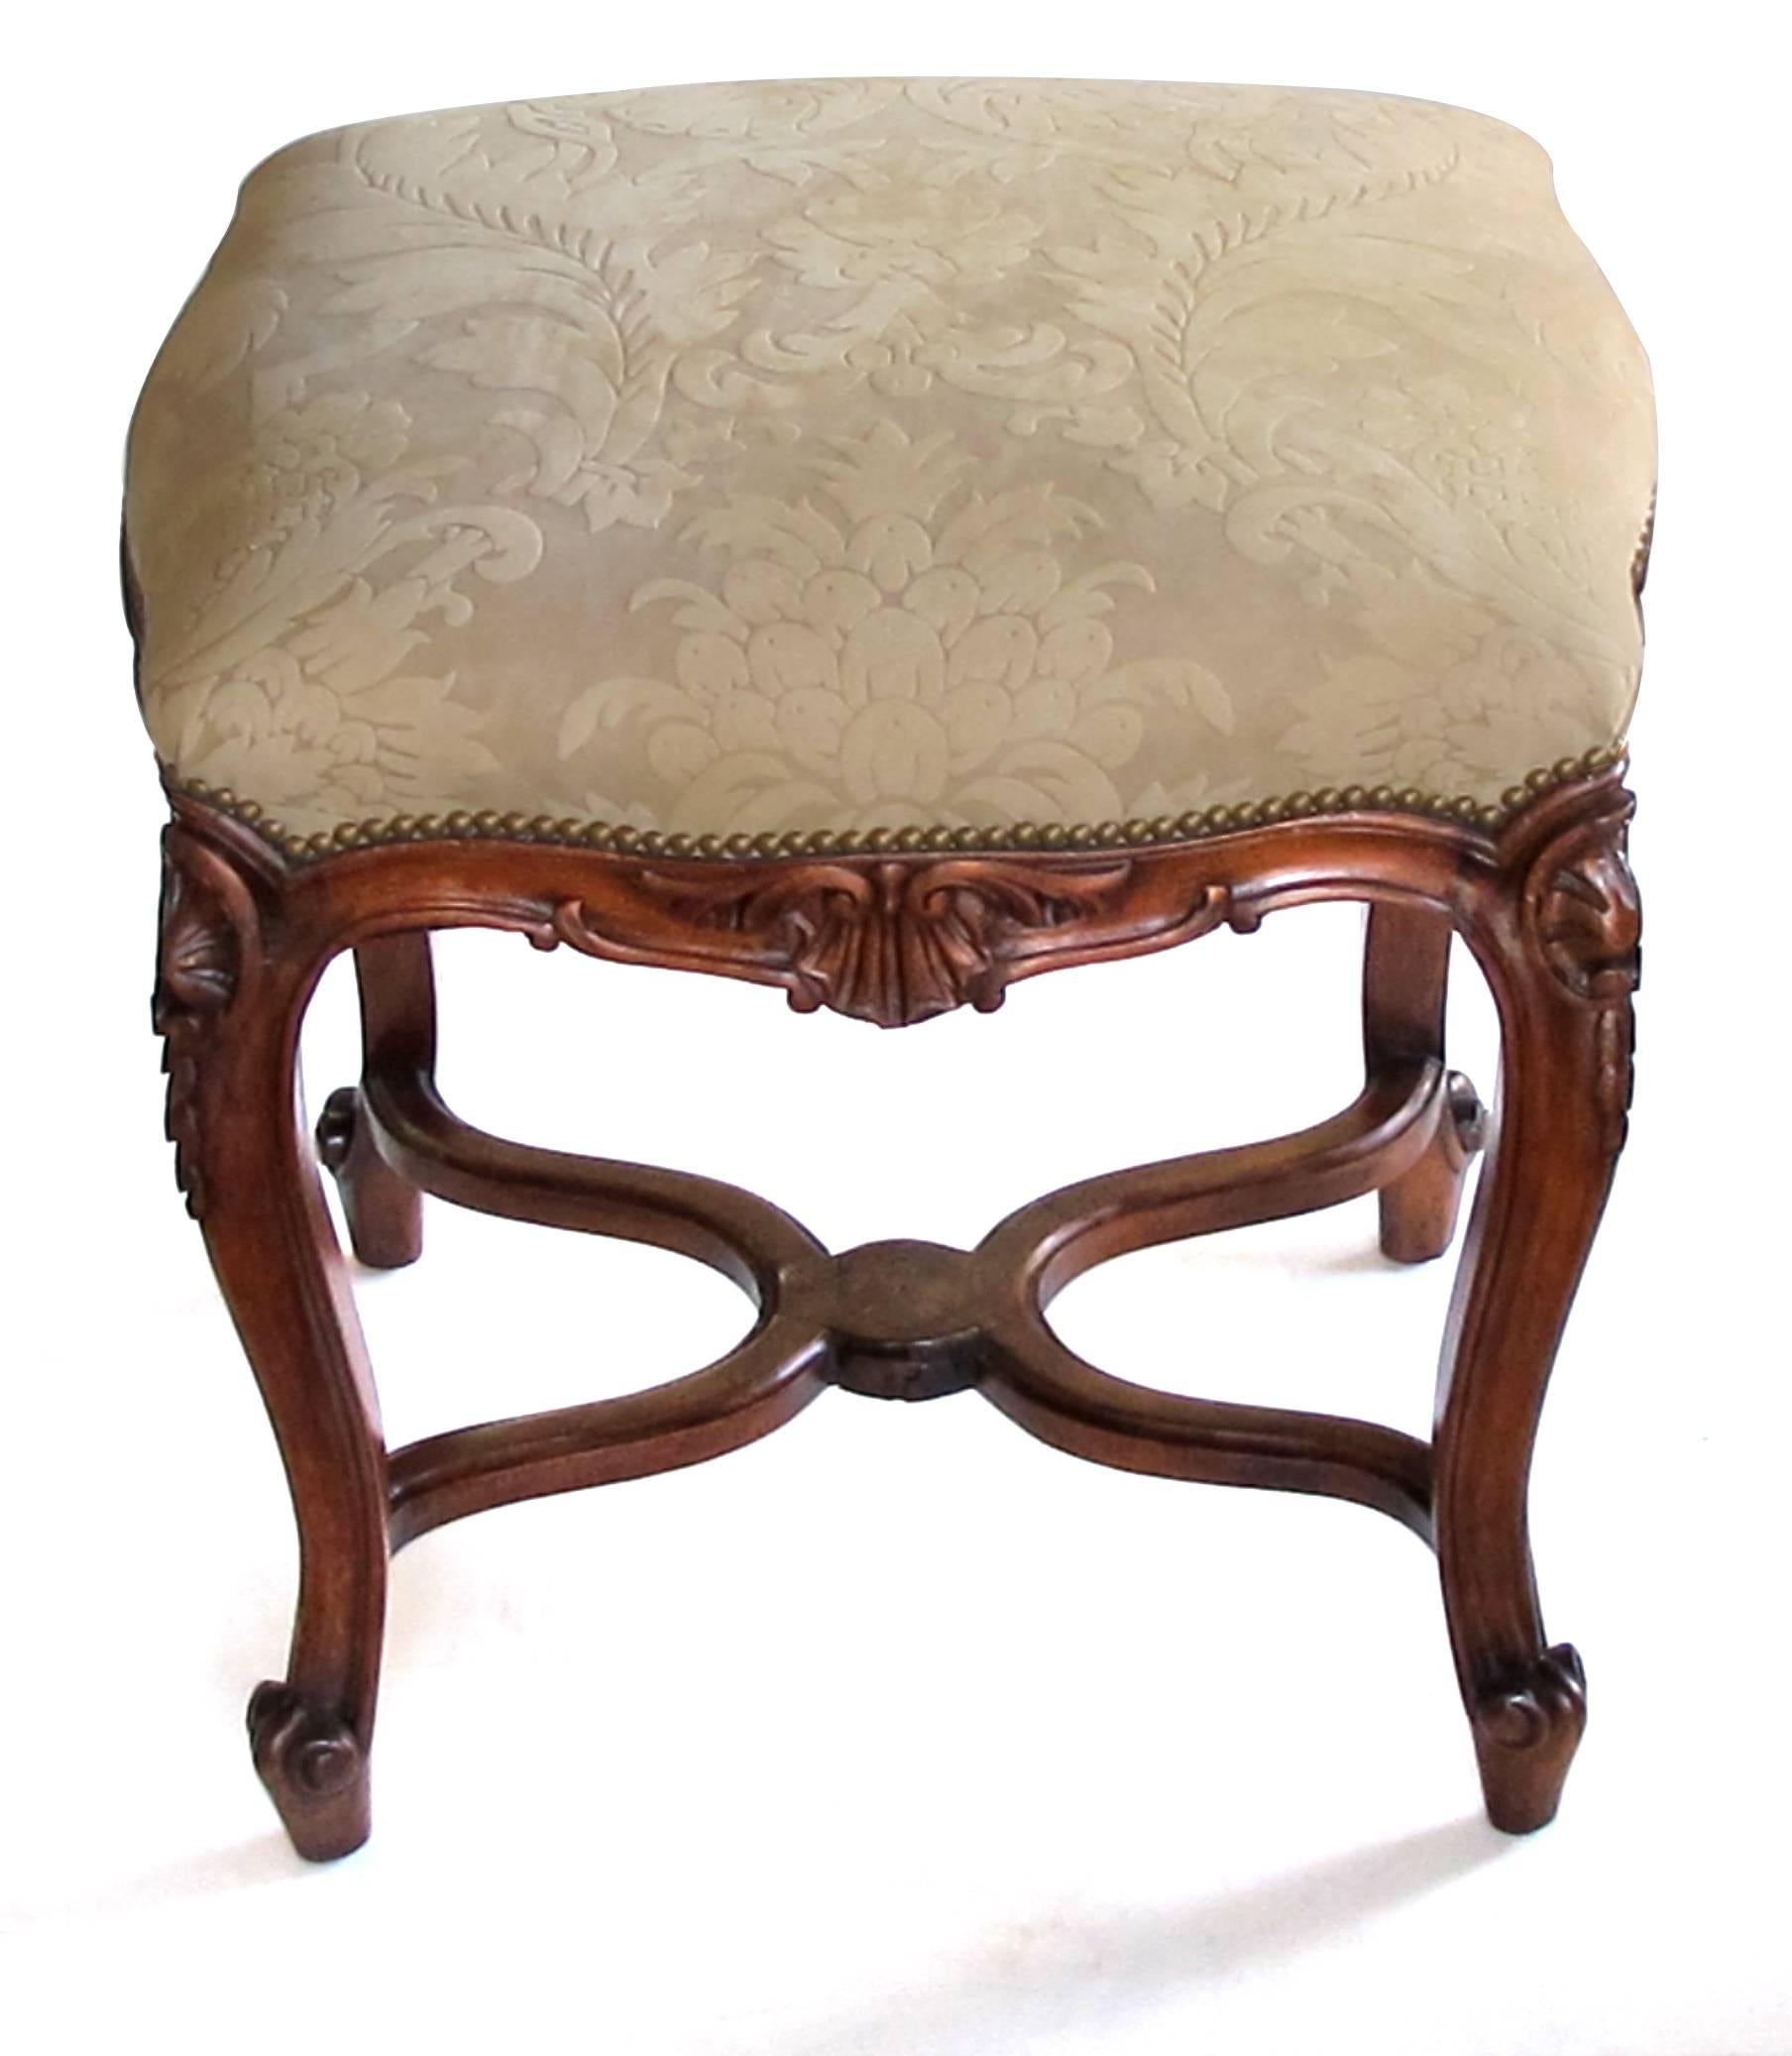 An elegant French Regence style carved walnut serpentine-shaped stool with cut-suede upholstery; the serpentine upholstered seat of new cut-suede upholstery above a shaped apron centering a carved shell motif; raised on cabriole legs with rocaille